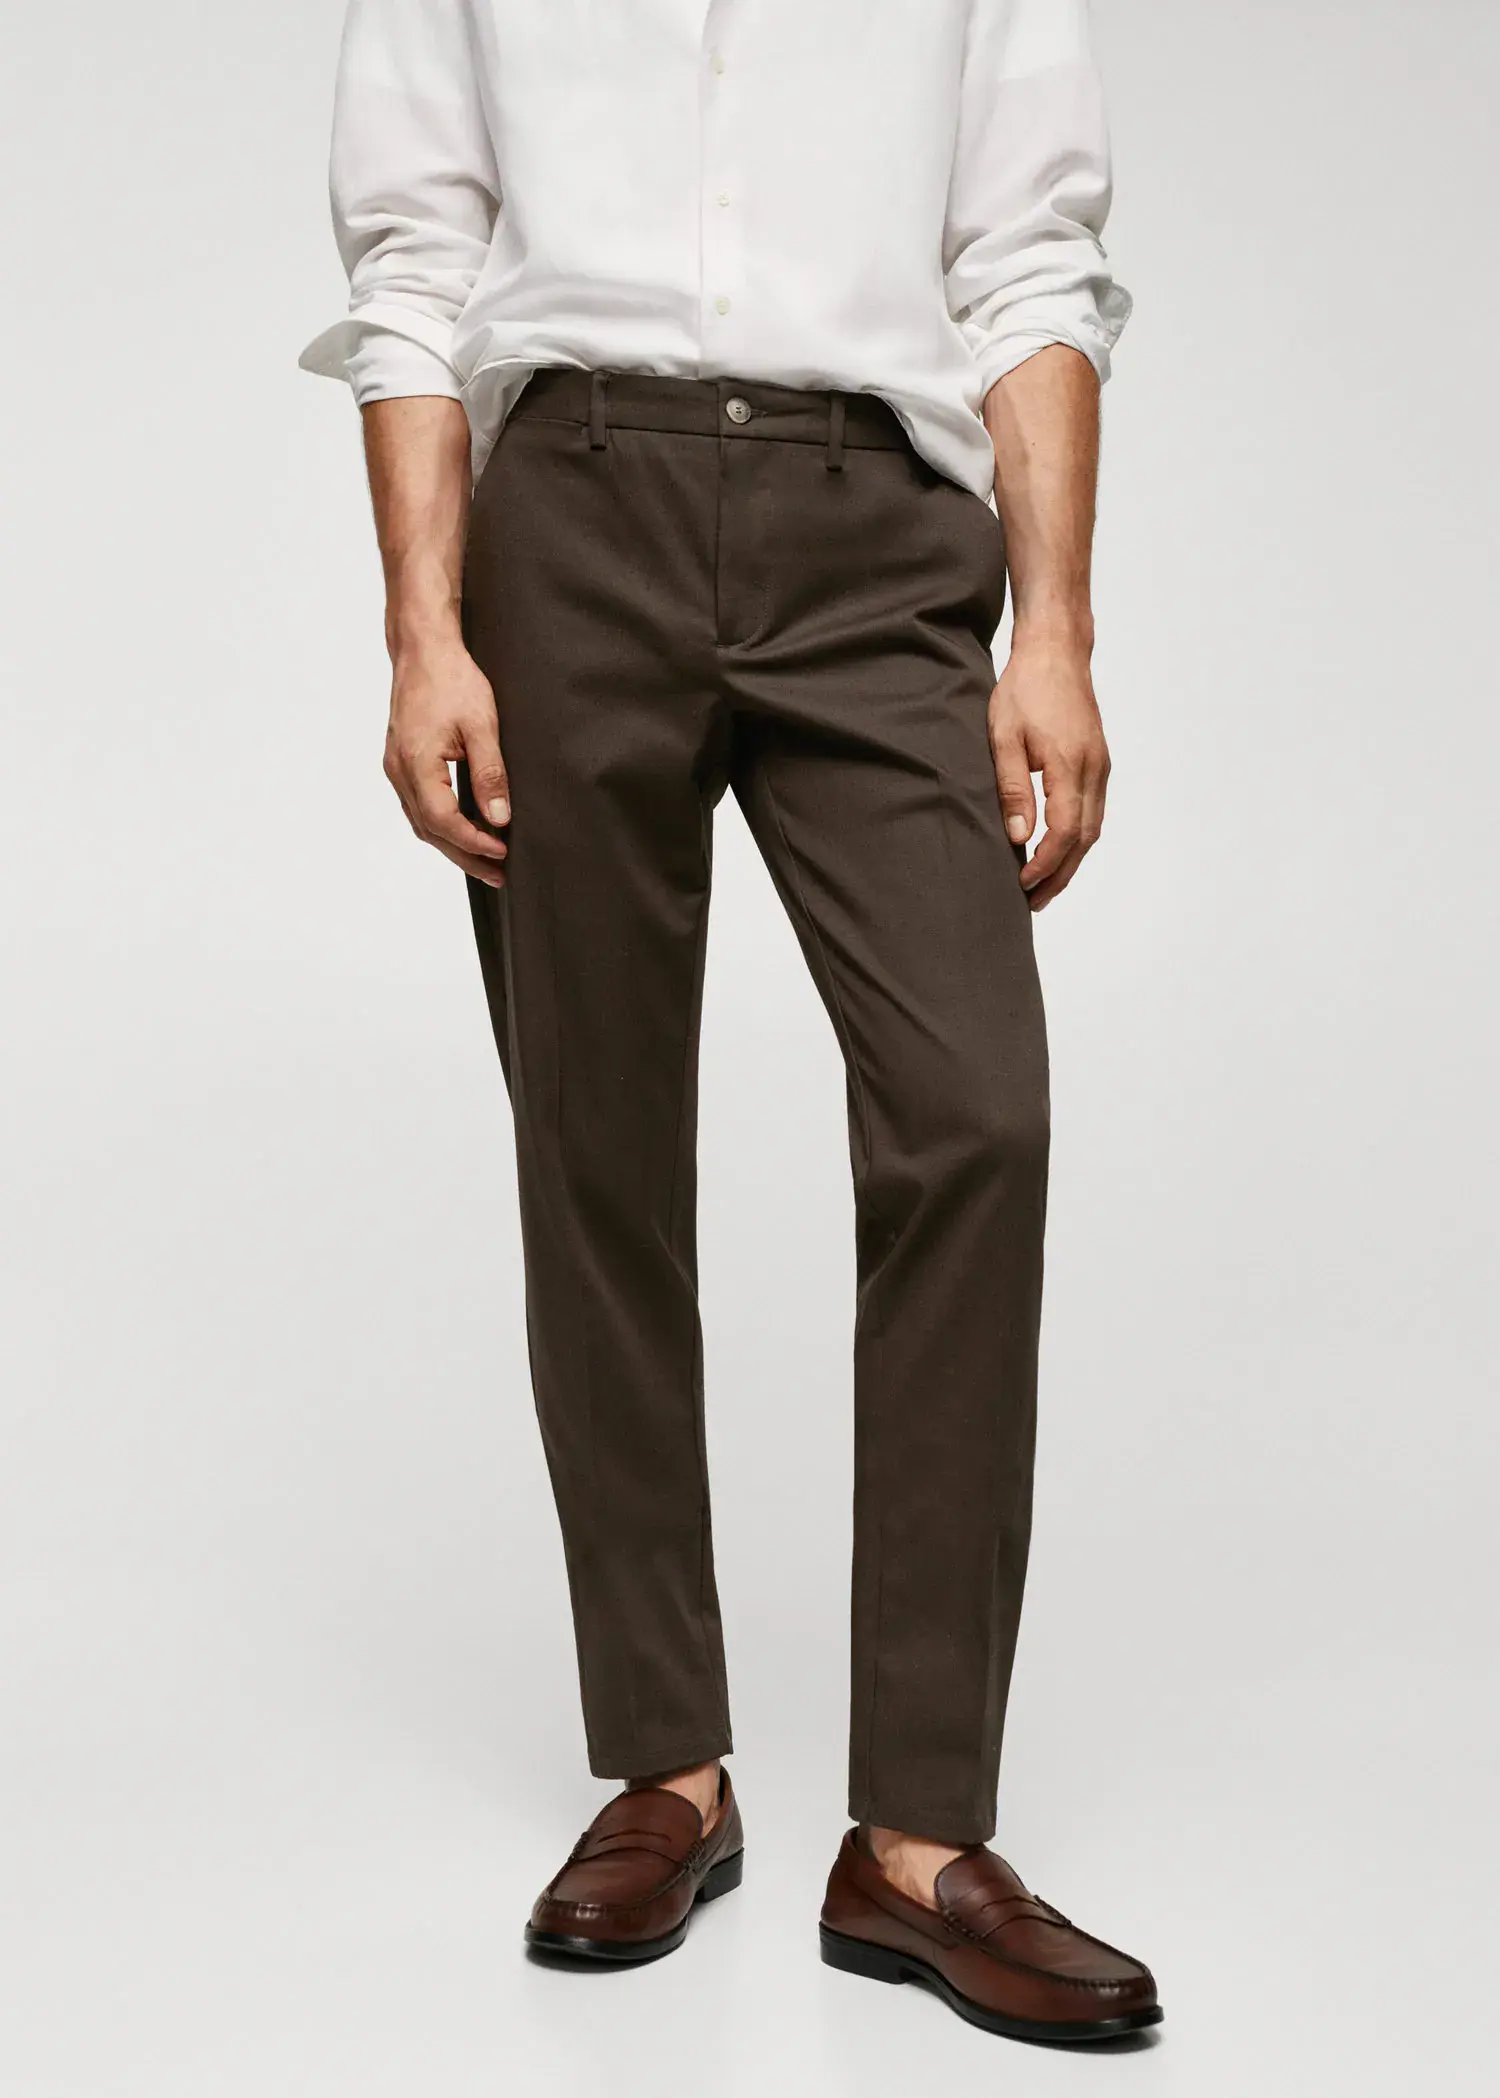 Mango Slim fit chino trousers. a man wearing brown pants and a white shirt. 